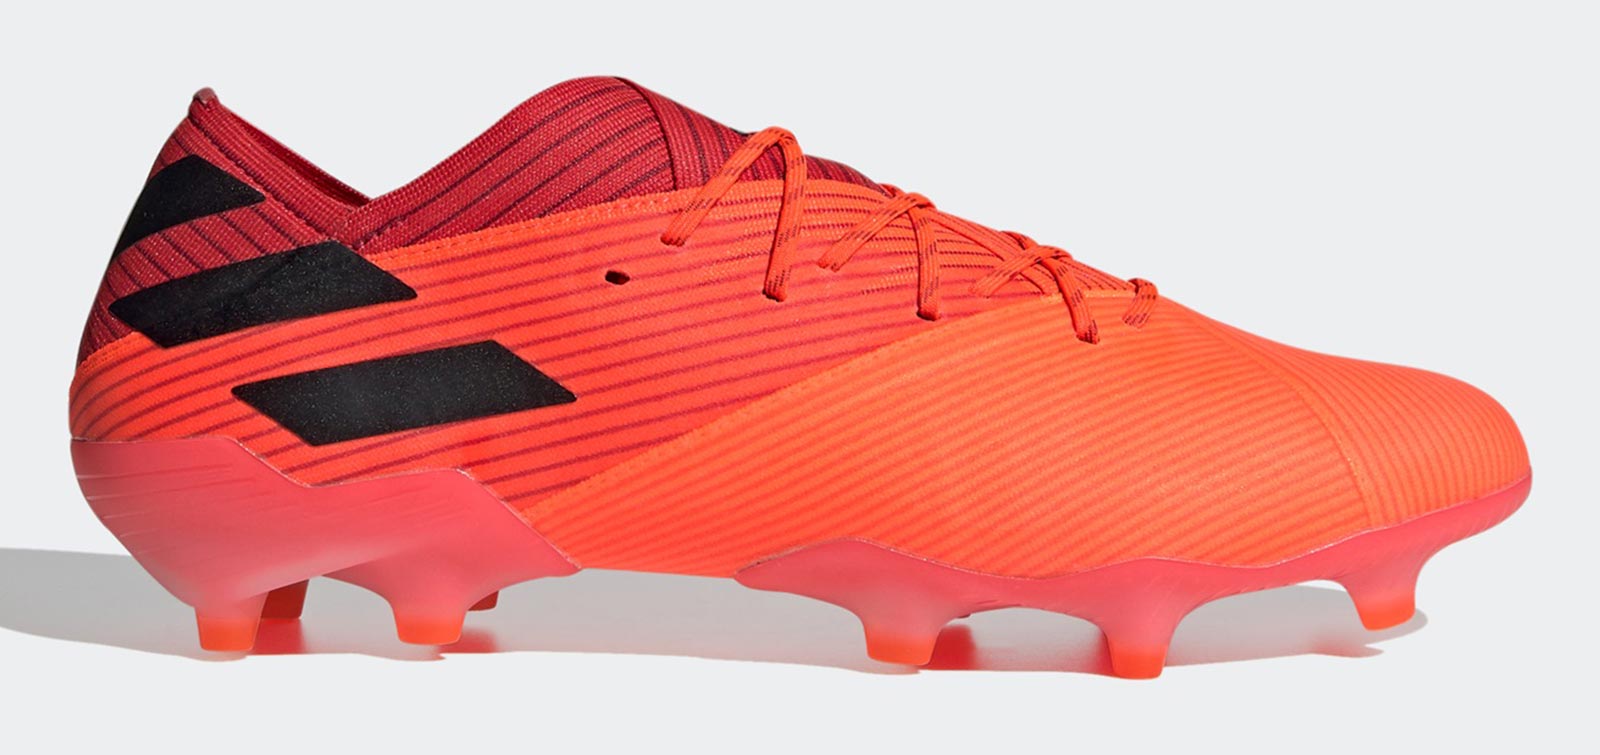 messi latest boots 2020